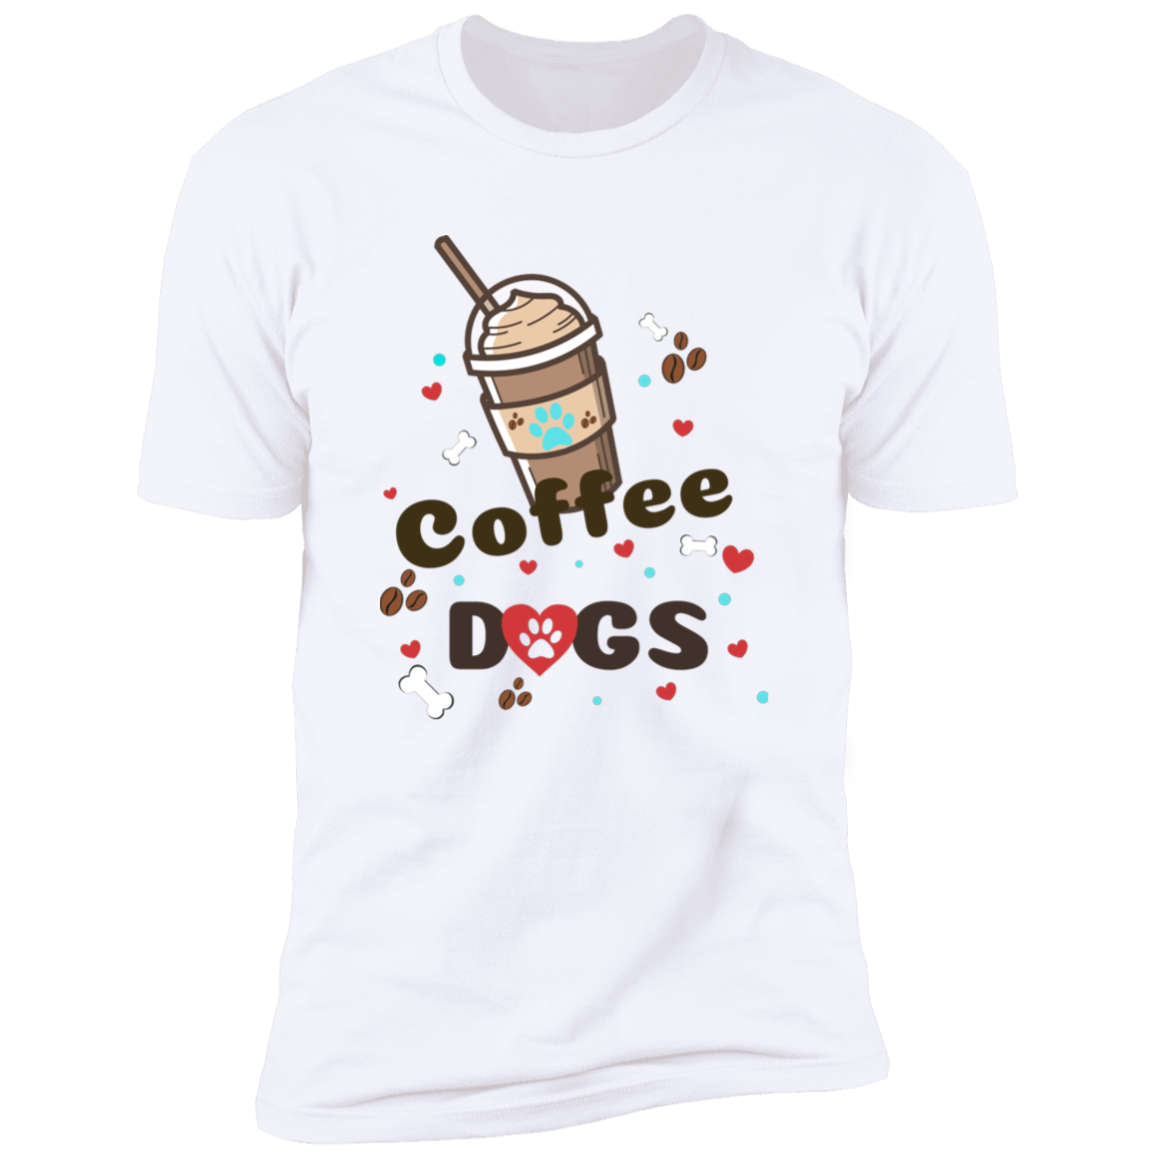 Blended Coffee Dogs T-shirt, Dog Shirt for humans, in white